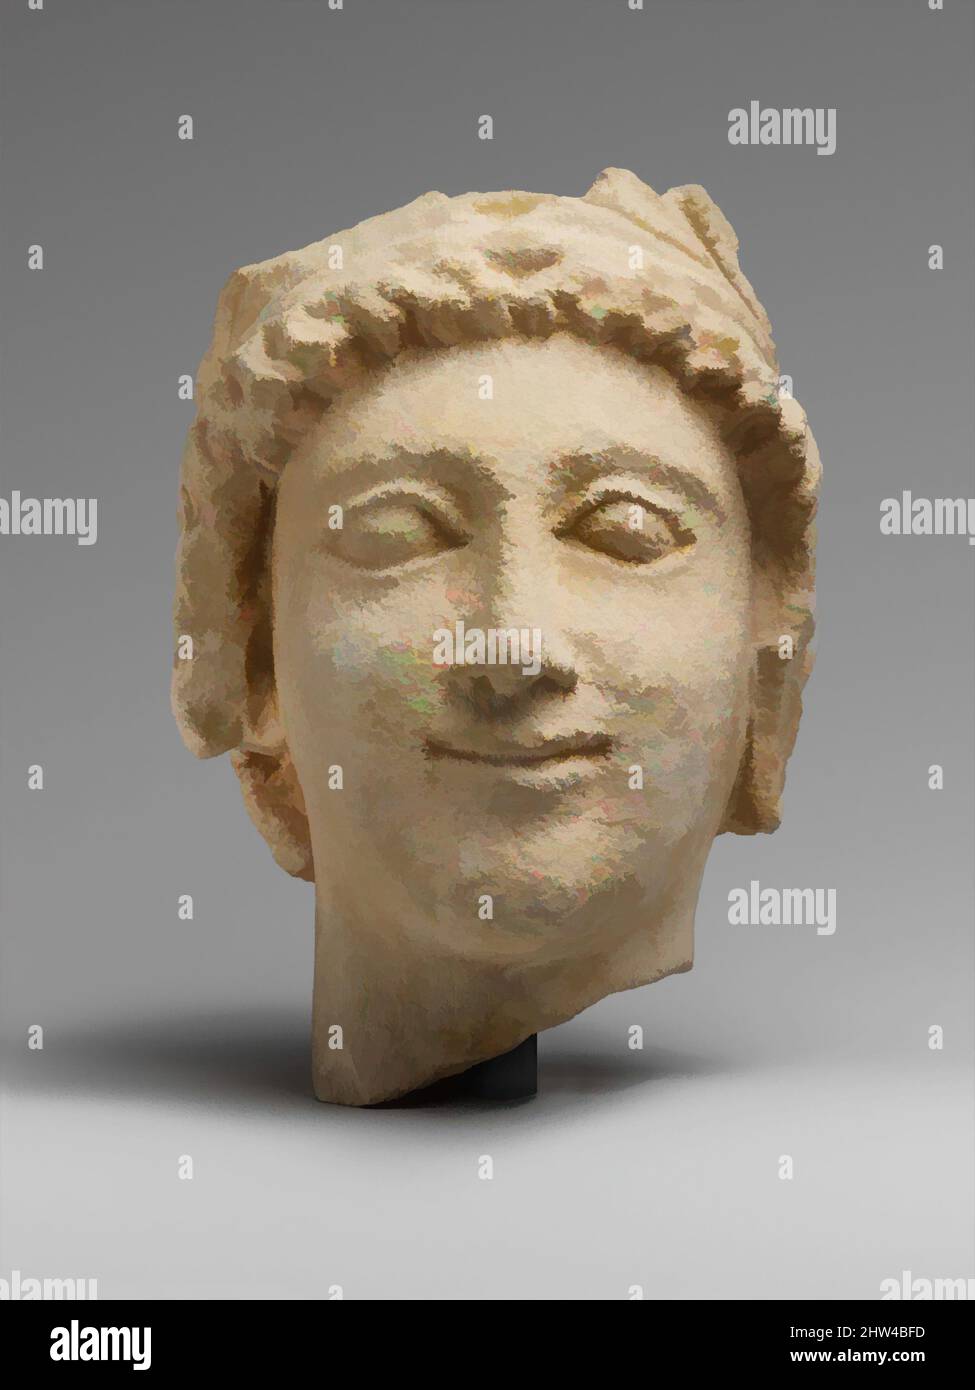 Art inspired by Limestone head of a wreathed youth, Classical, 5th century B.C., Cypriot, Limestone, Overall: 5 1/2 x 3 3/8 x 4 3/4 in. (14 x 8.6 x 12.1 cm), Stone Sculpture, Head of a youth wearing a wreath with an oval-shaped, smiling face, a long pointed nose, bulging eyeballs with, Classic works modernized by Artotop with a splash of modernity. Shapes, color and value, eye-catching visual impact on art. Emotions through freedom of artworks in a contemporary way. A timeless message pursuing a wildly creative new direction. Artists turning to the digital medium and creating the Artotop NFT Stock Photo